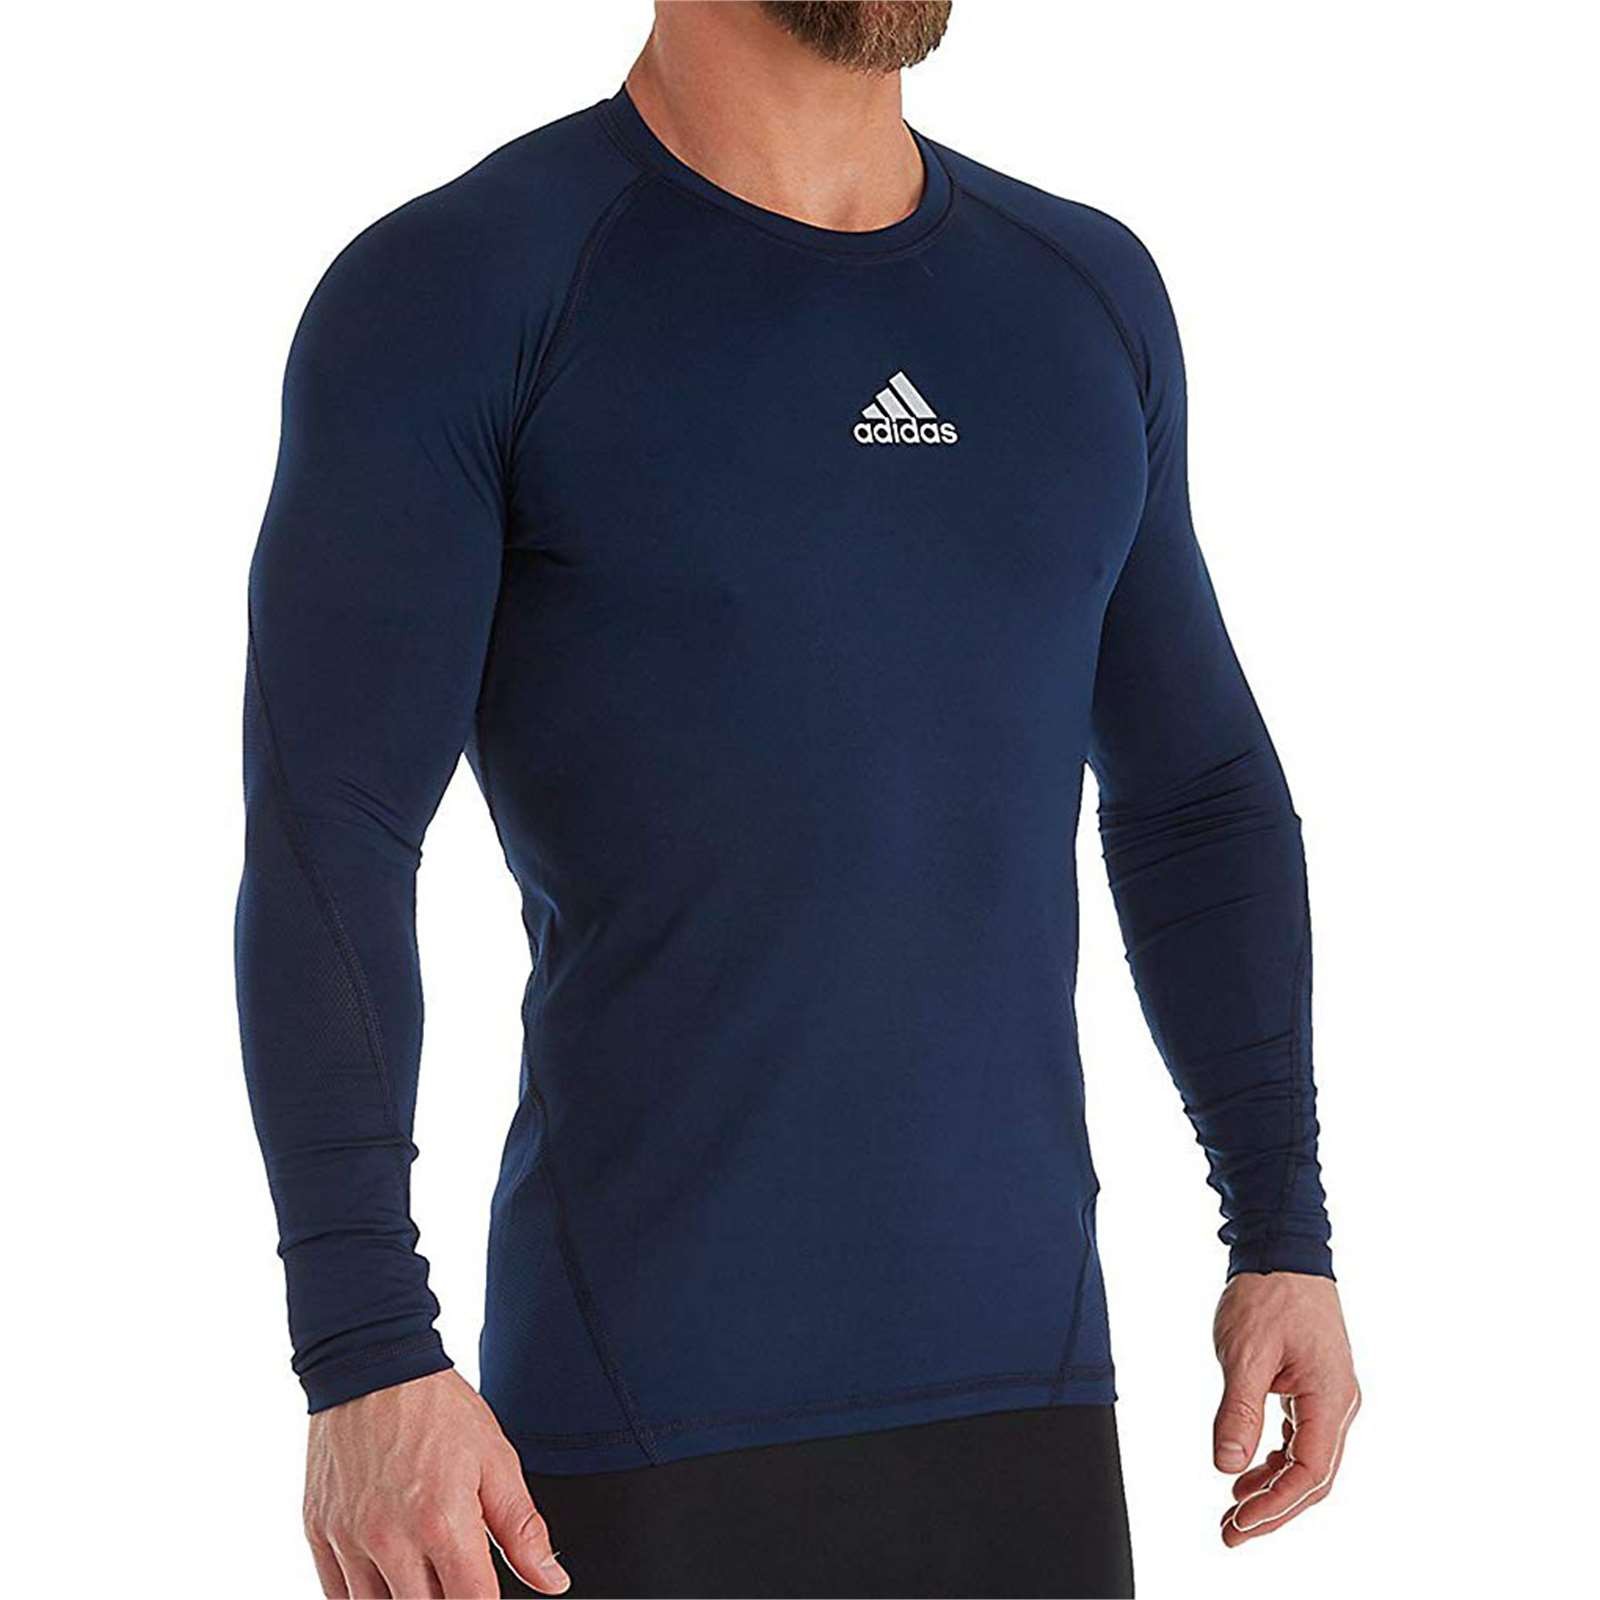 elect east The above Adidas Men Alphaskin Long Sleeve Compression T-Shirt